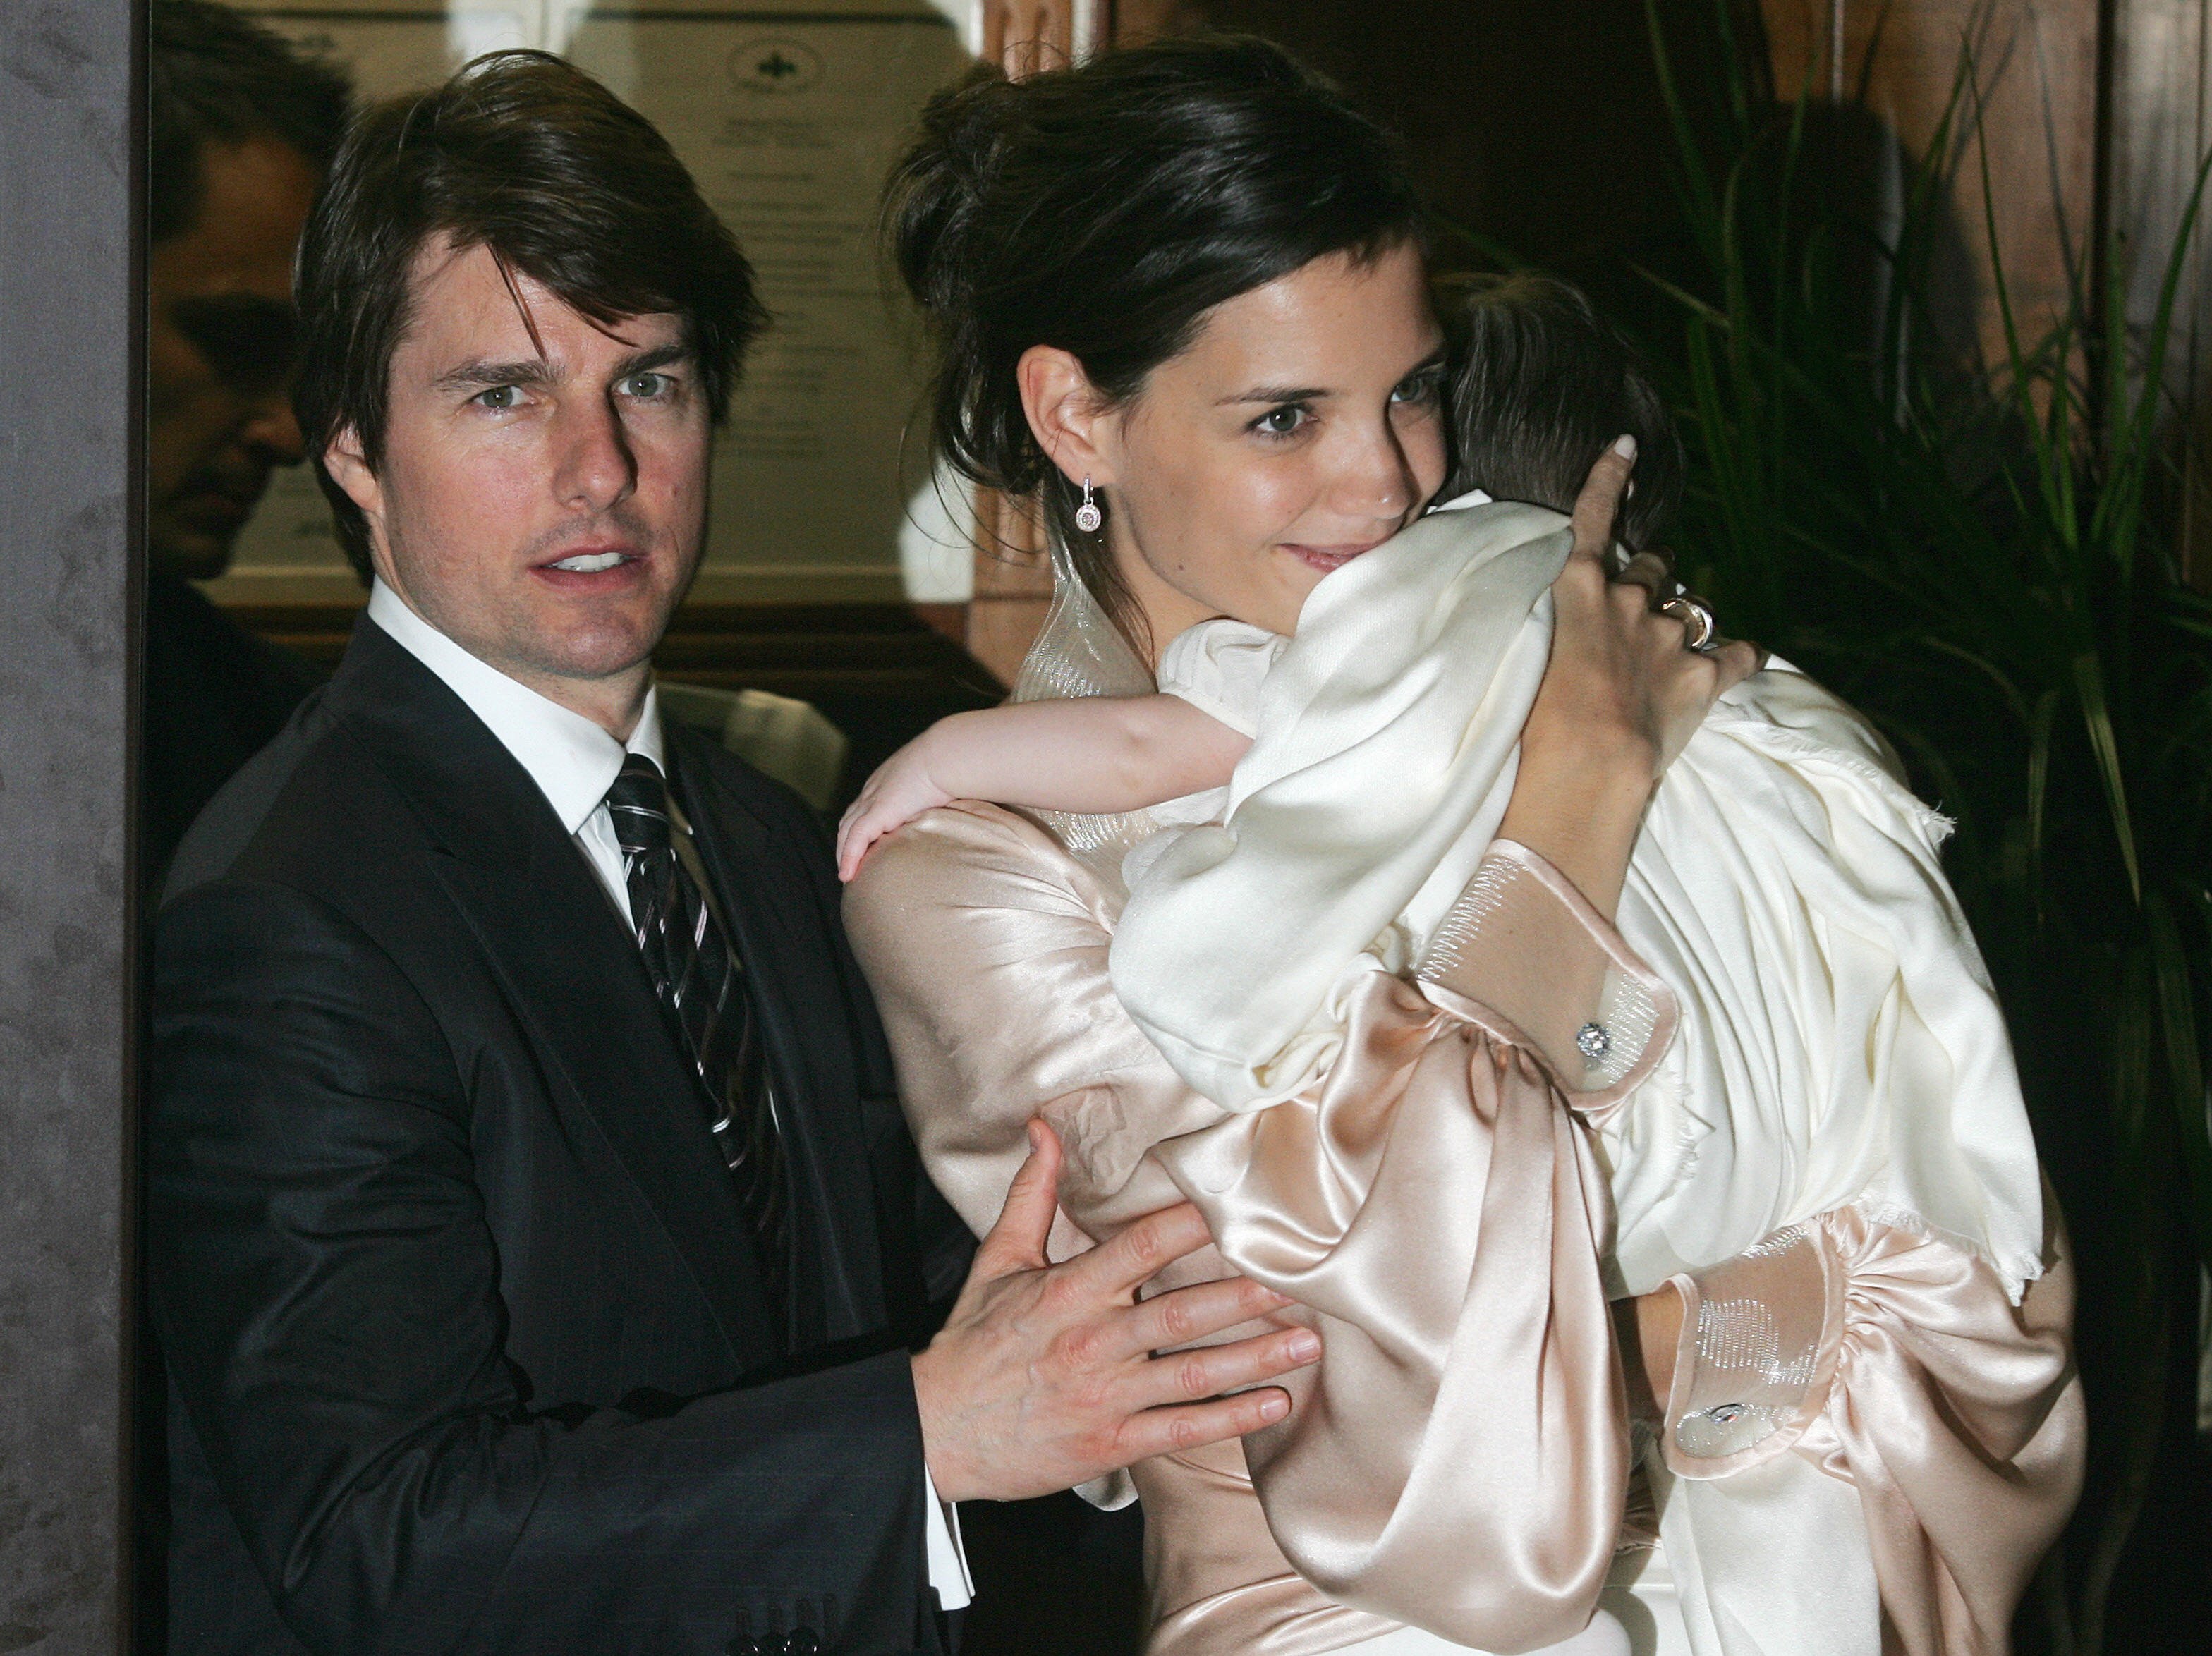 Tom Cruise and his fiancee Katie Holmes, holding their daughter Suri, leave a restaurant in central Rome, early 17 November 2006 | Source: Getty Images